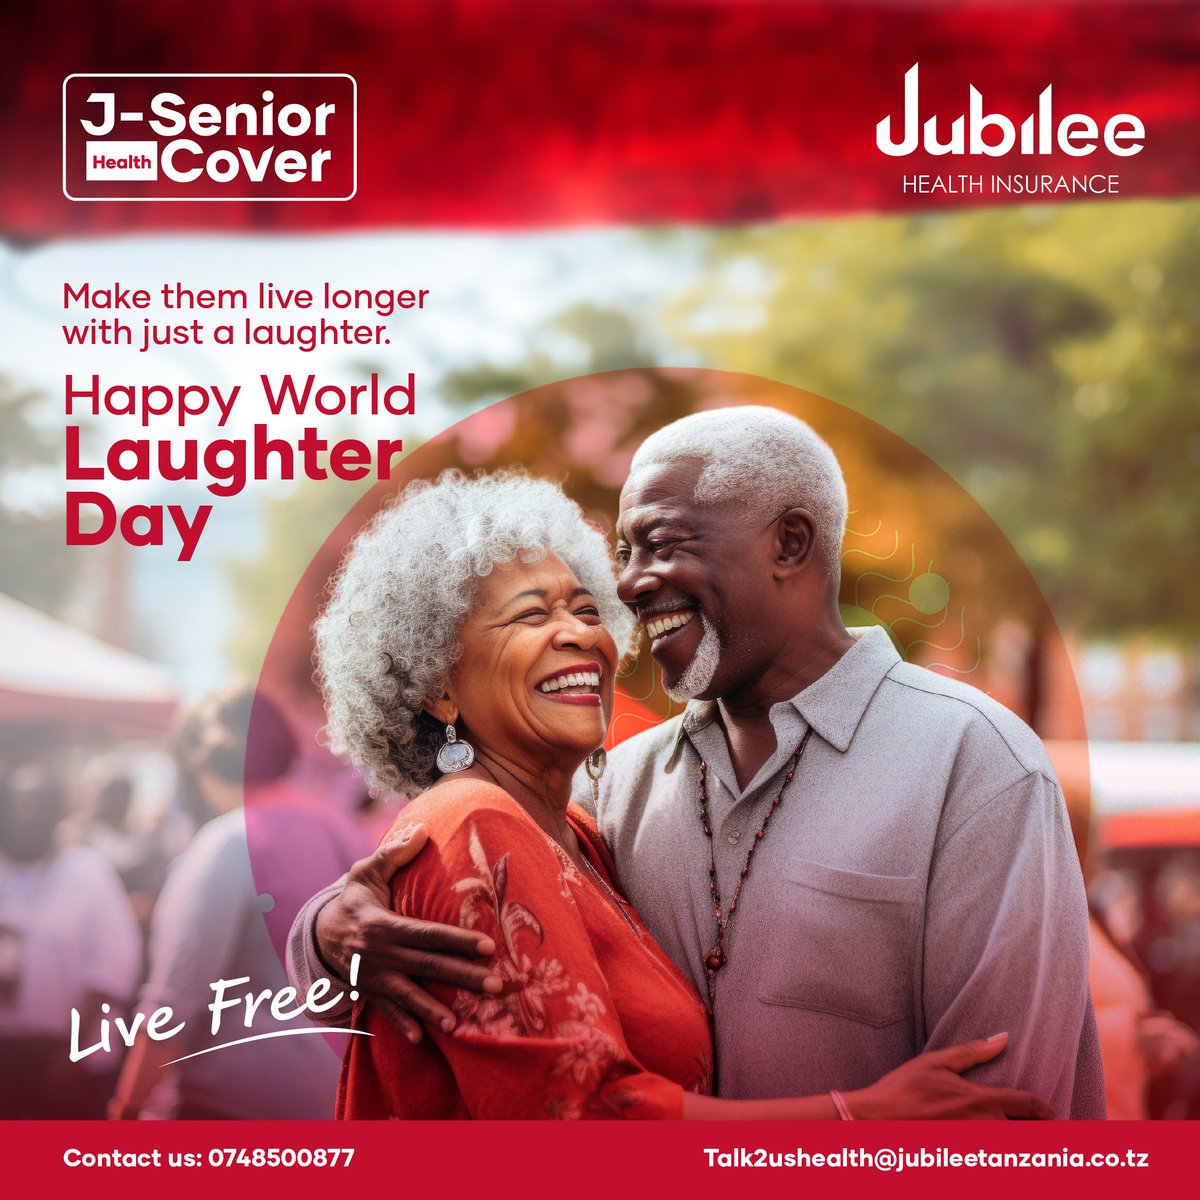 Although J-Senior cover provides 24/7 medical attention, laughter can boost their immune system and add extra years to their life. 
Happy World Laughter Day! 
#WorldLaughterDay 
#LiveFree